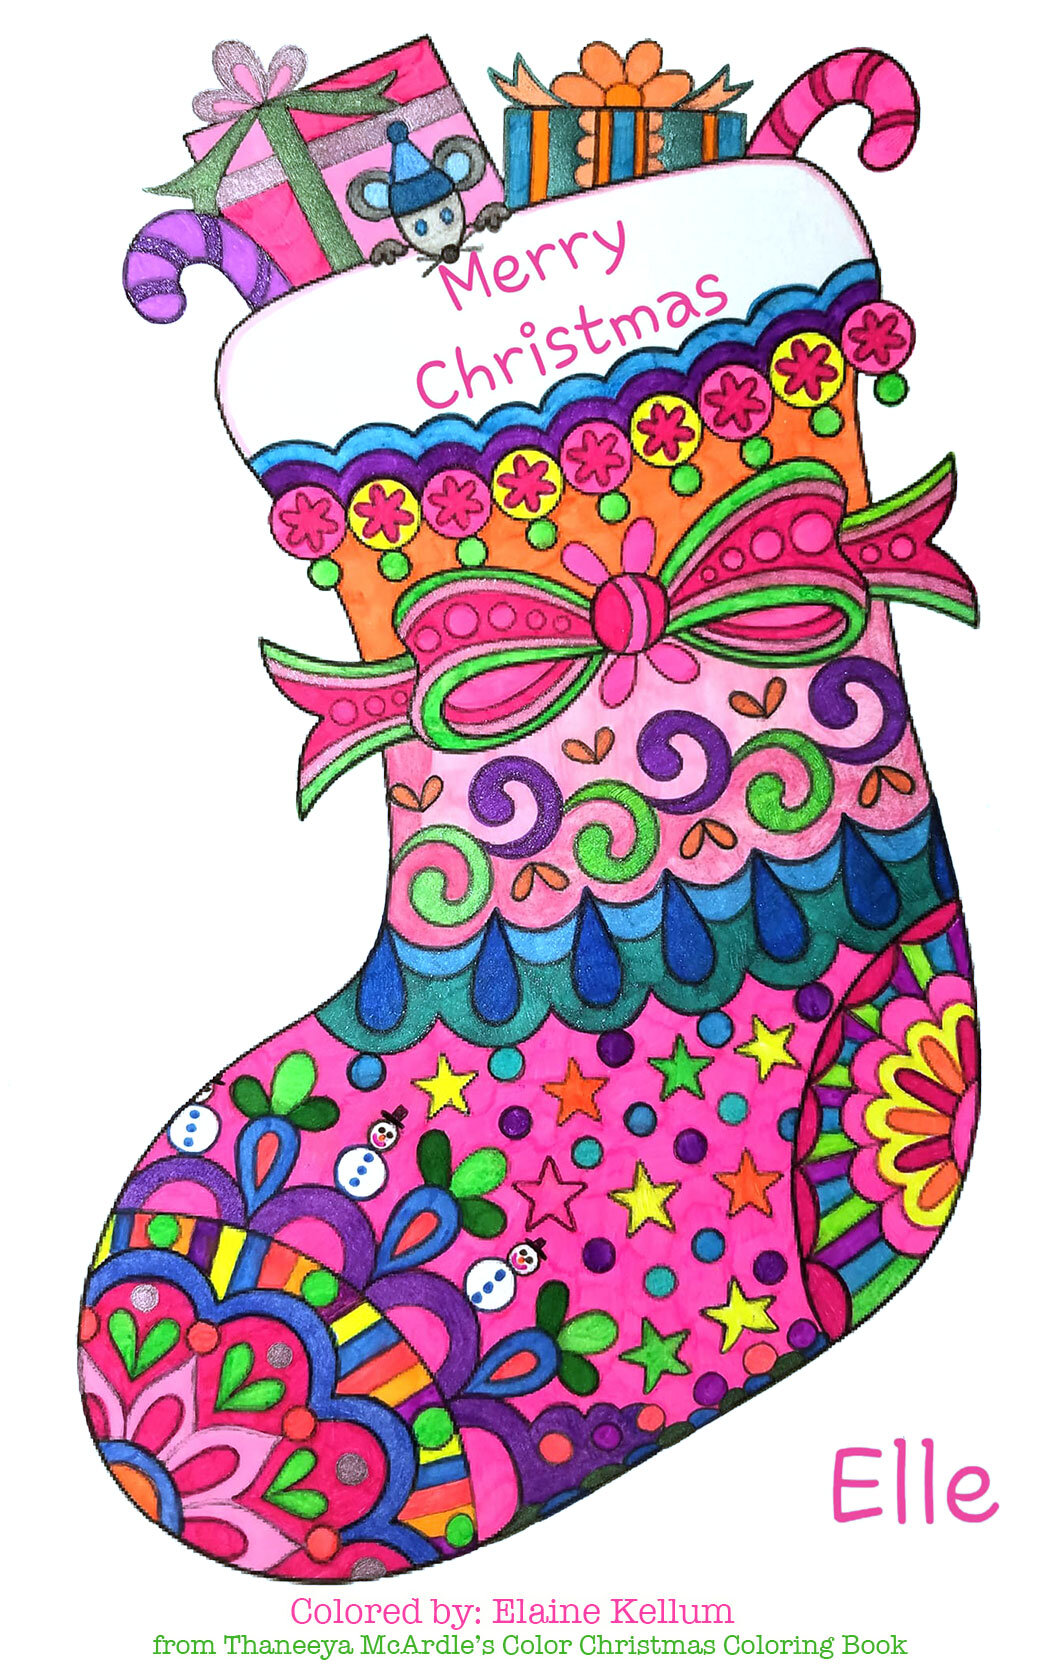 New Christmas Coloring Galleries from Thaneeya McArdle's Christmas Coloring  Books —